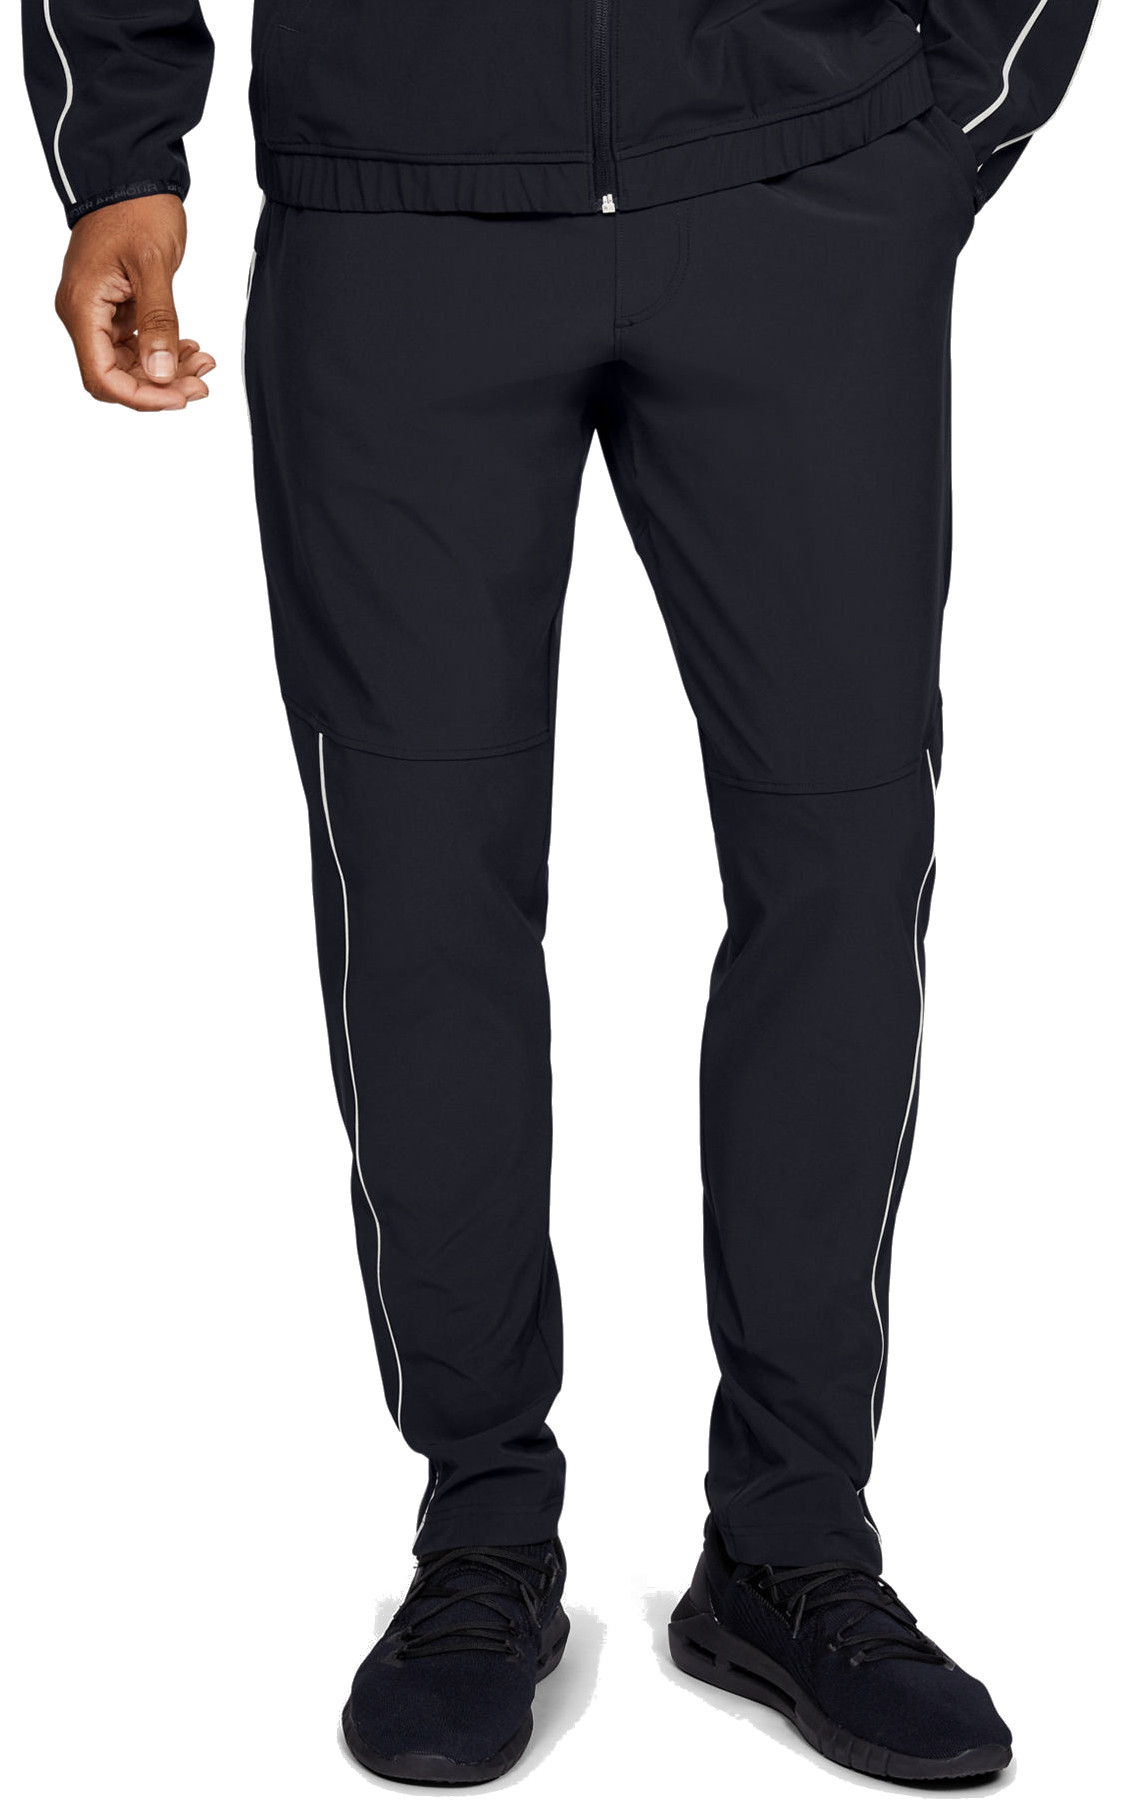 Under Armour Men's Athlete Recovery Woven Warm Up Bottom Trousers